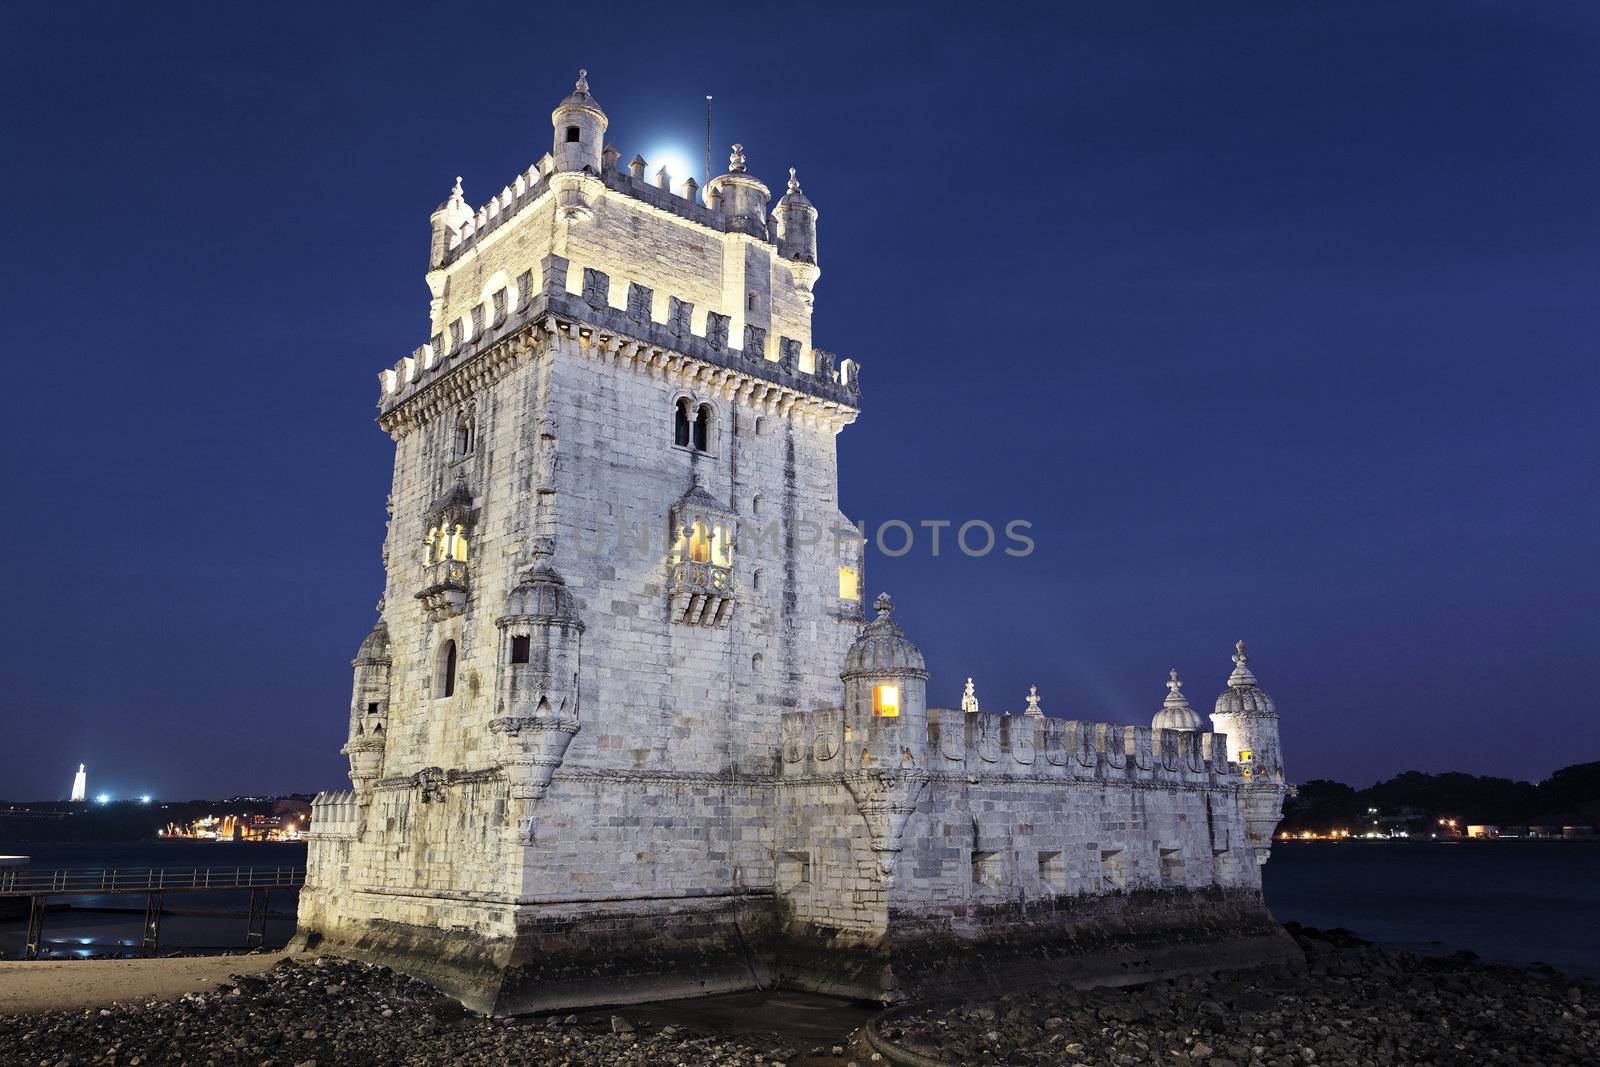 Tower of Belem by night by vwalakte